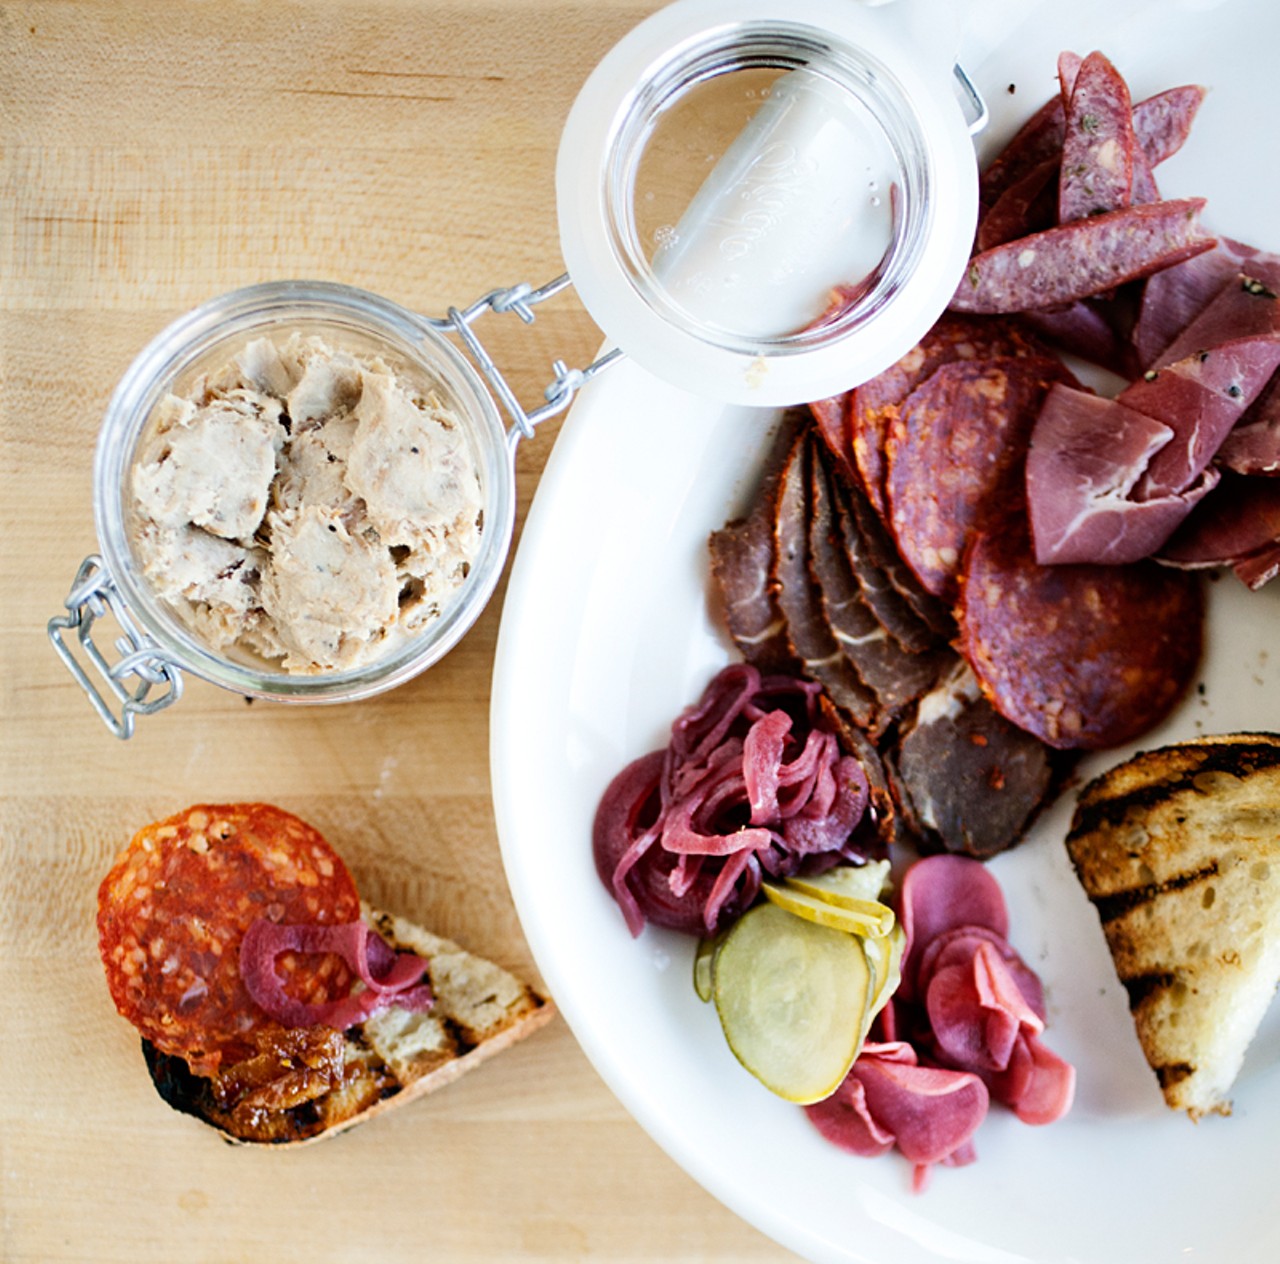 The Family Style Platter is house-cured meats, potted pig, apple and raisin chutney and country bread.